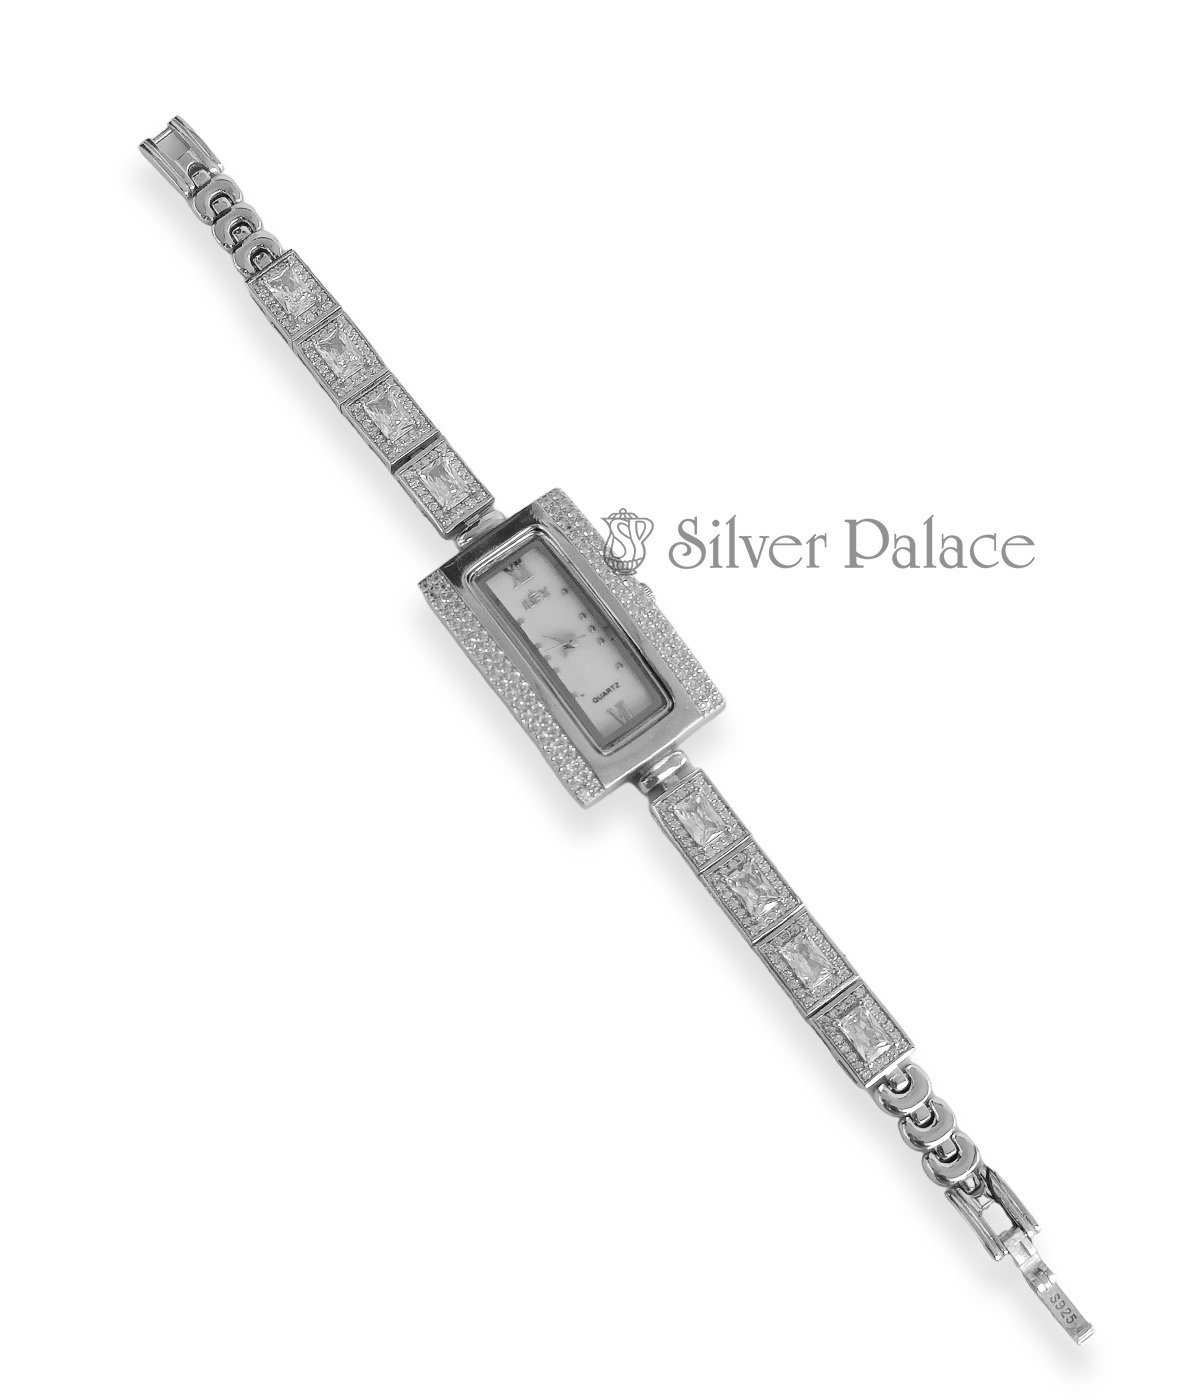 92.5 STERLING SILVER RECTANGULAR DIAL STONE STUDED ADJUSTABLE STRAP WATCH